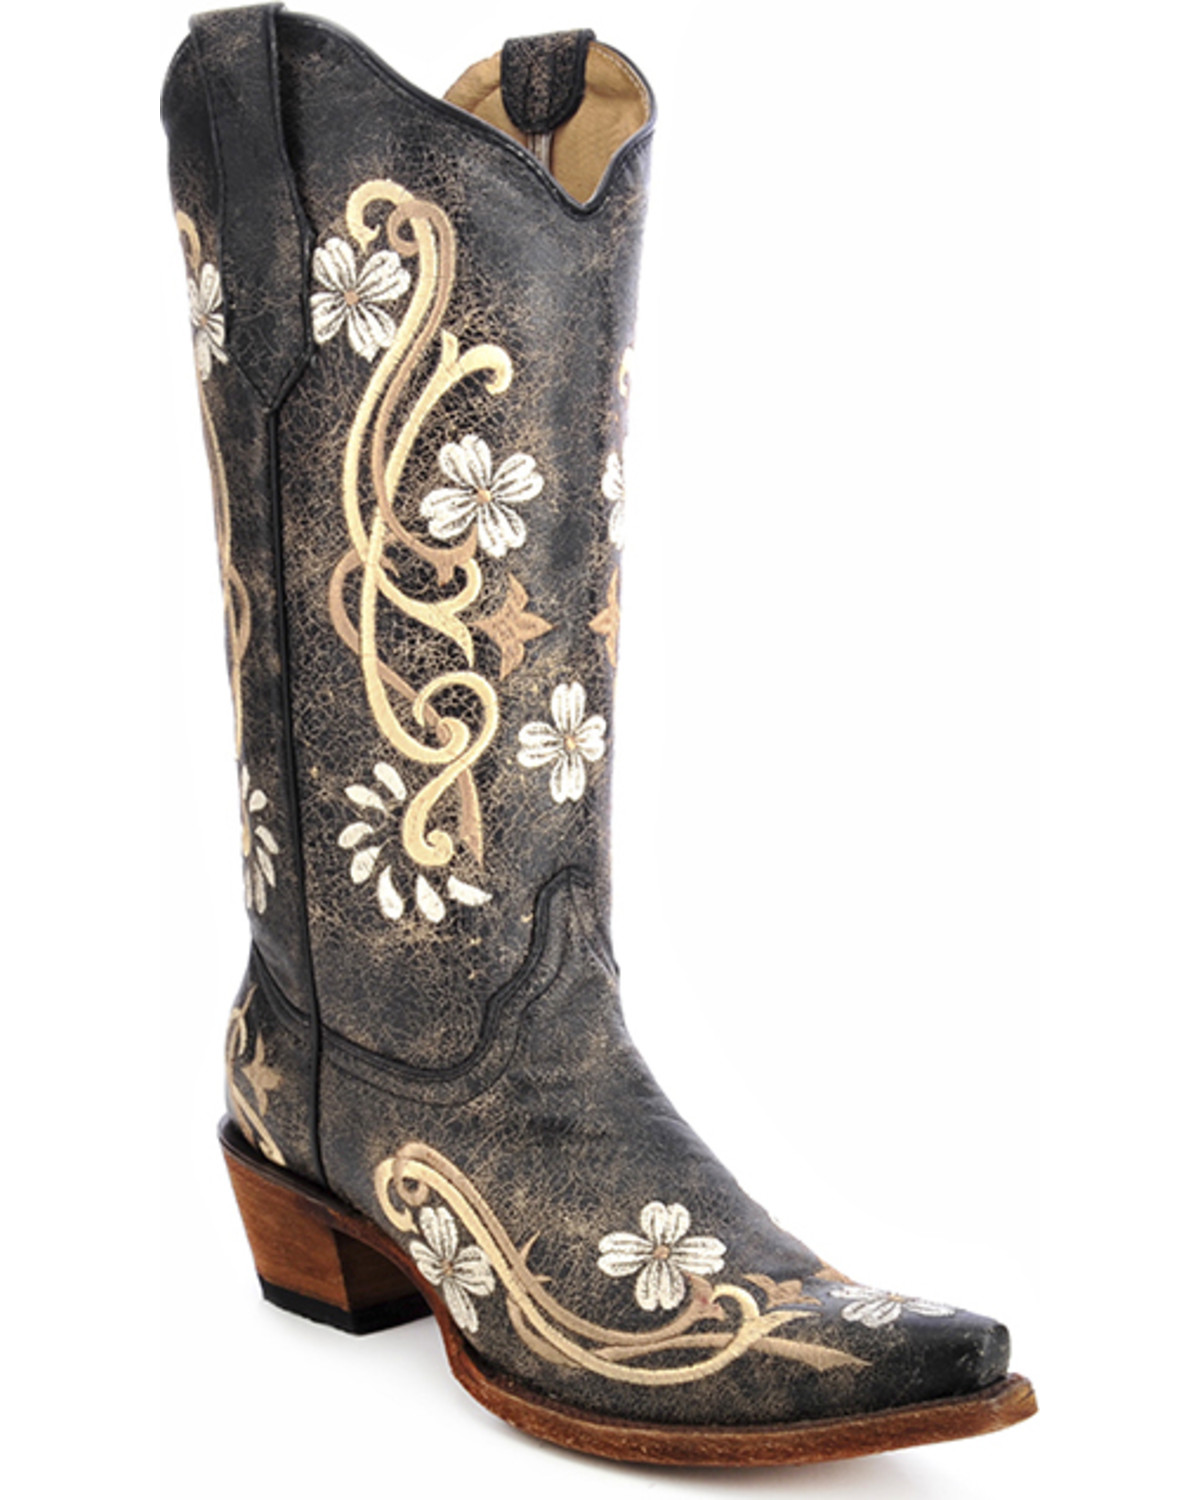 Circle G Women's Floral Embroidered Western Boots